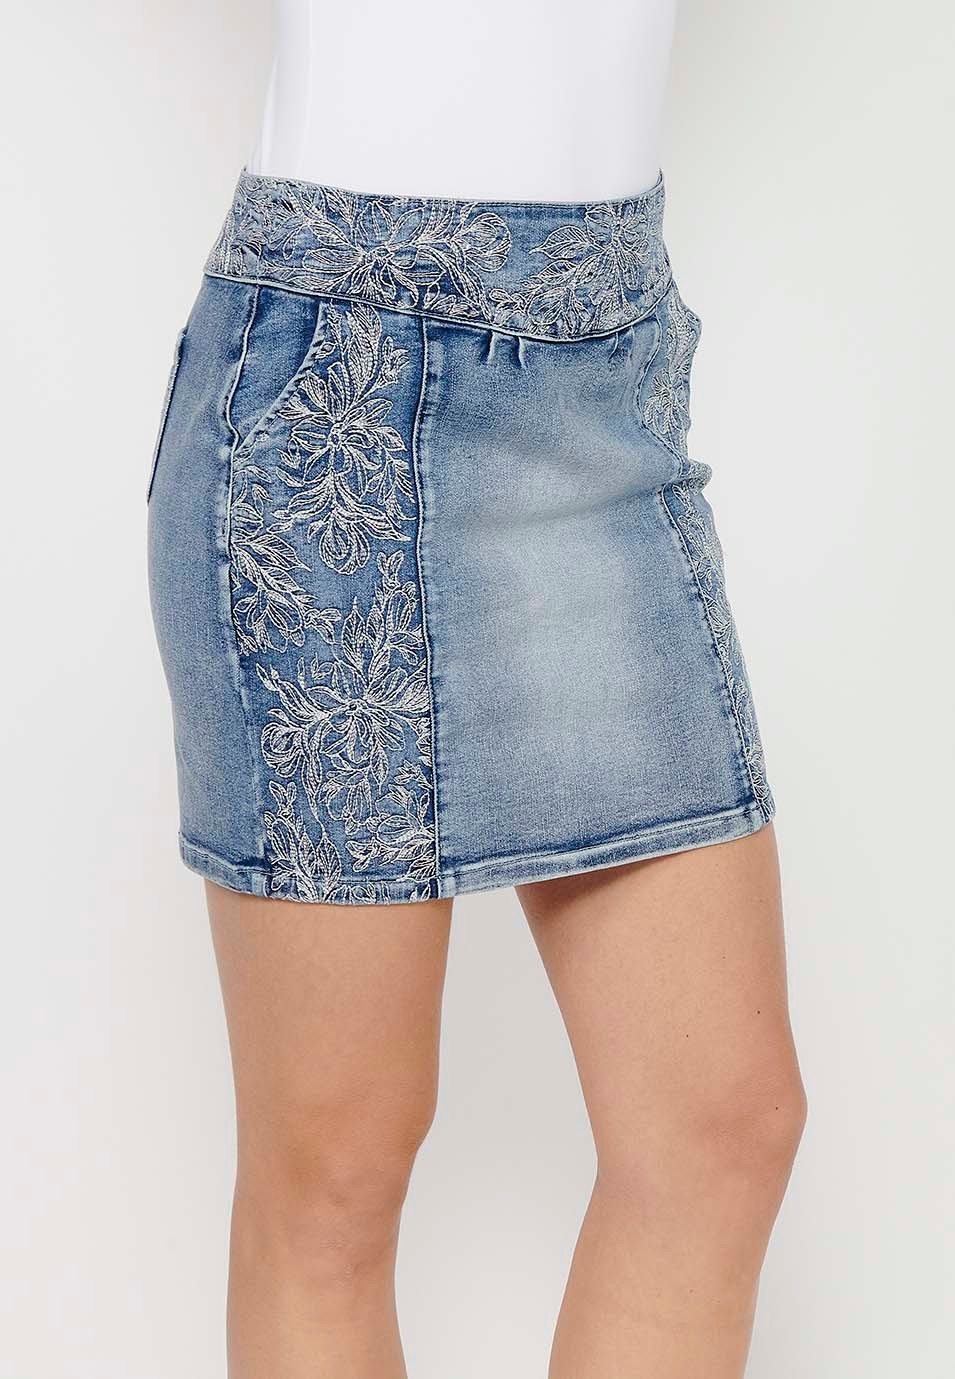 Short denim skirt with wide embroidered waist and floral embroidered details with side zipper closure in Blue for Women 7